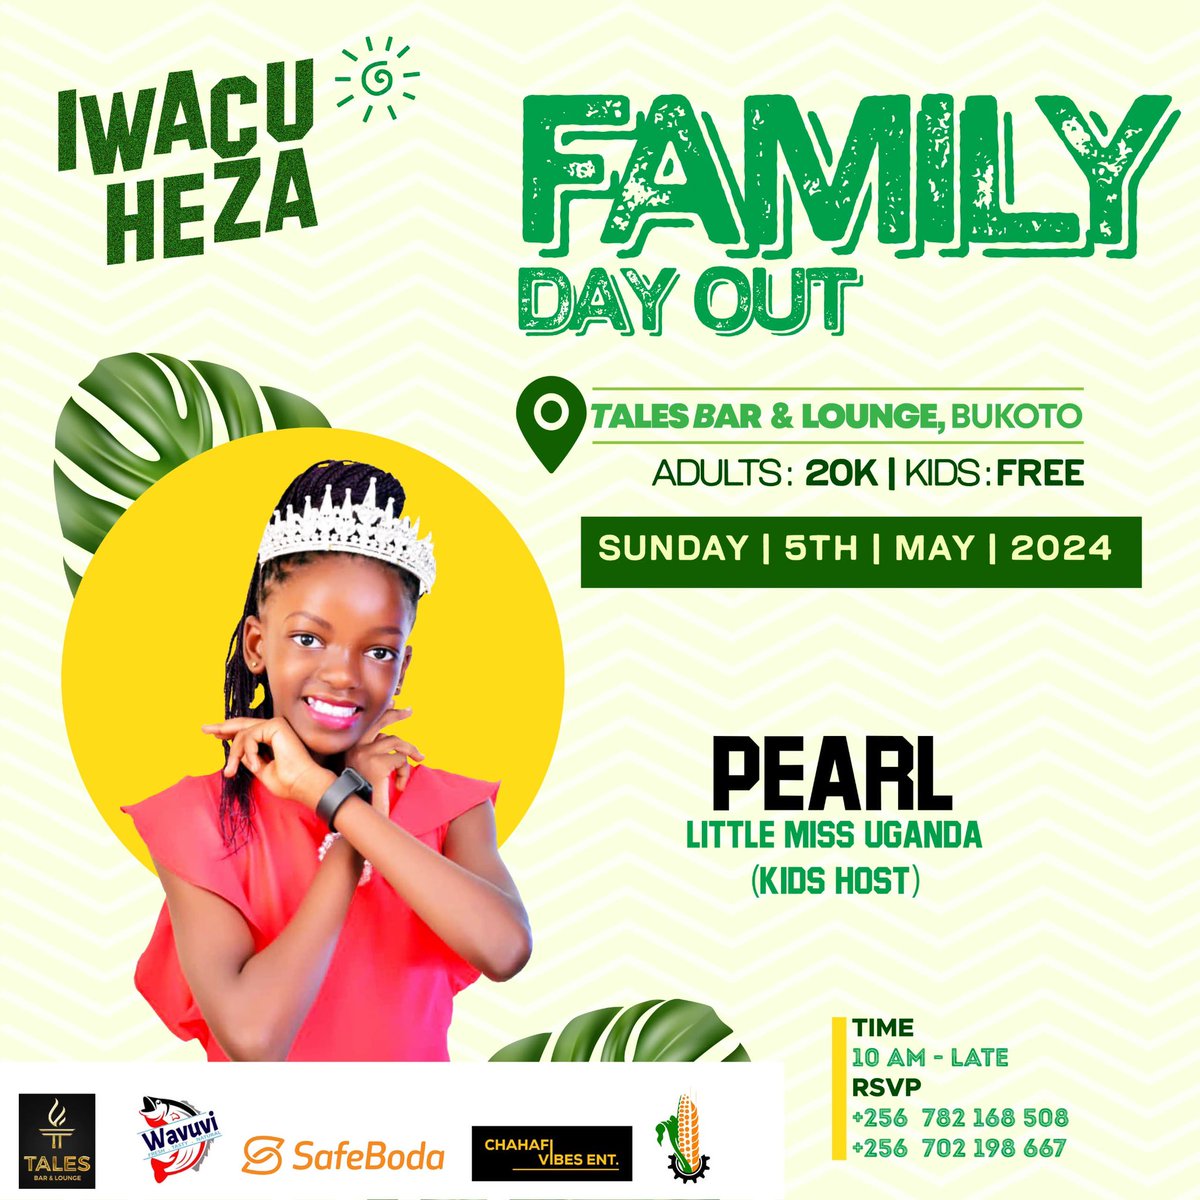 The beautiful Little Miss, PEARL will be welcoming the kids into the fun day

Kids have free entry on our #FamilyDayOut on 5th of May 

#IwacuHeza
 #TweseTuribamwe